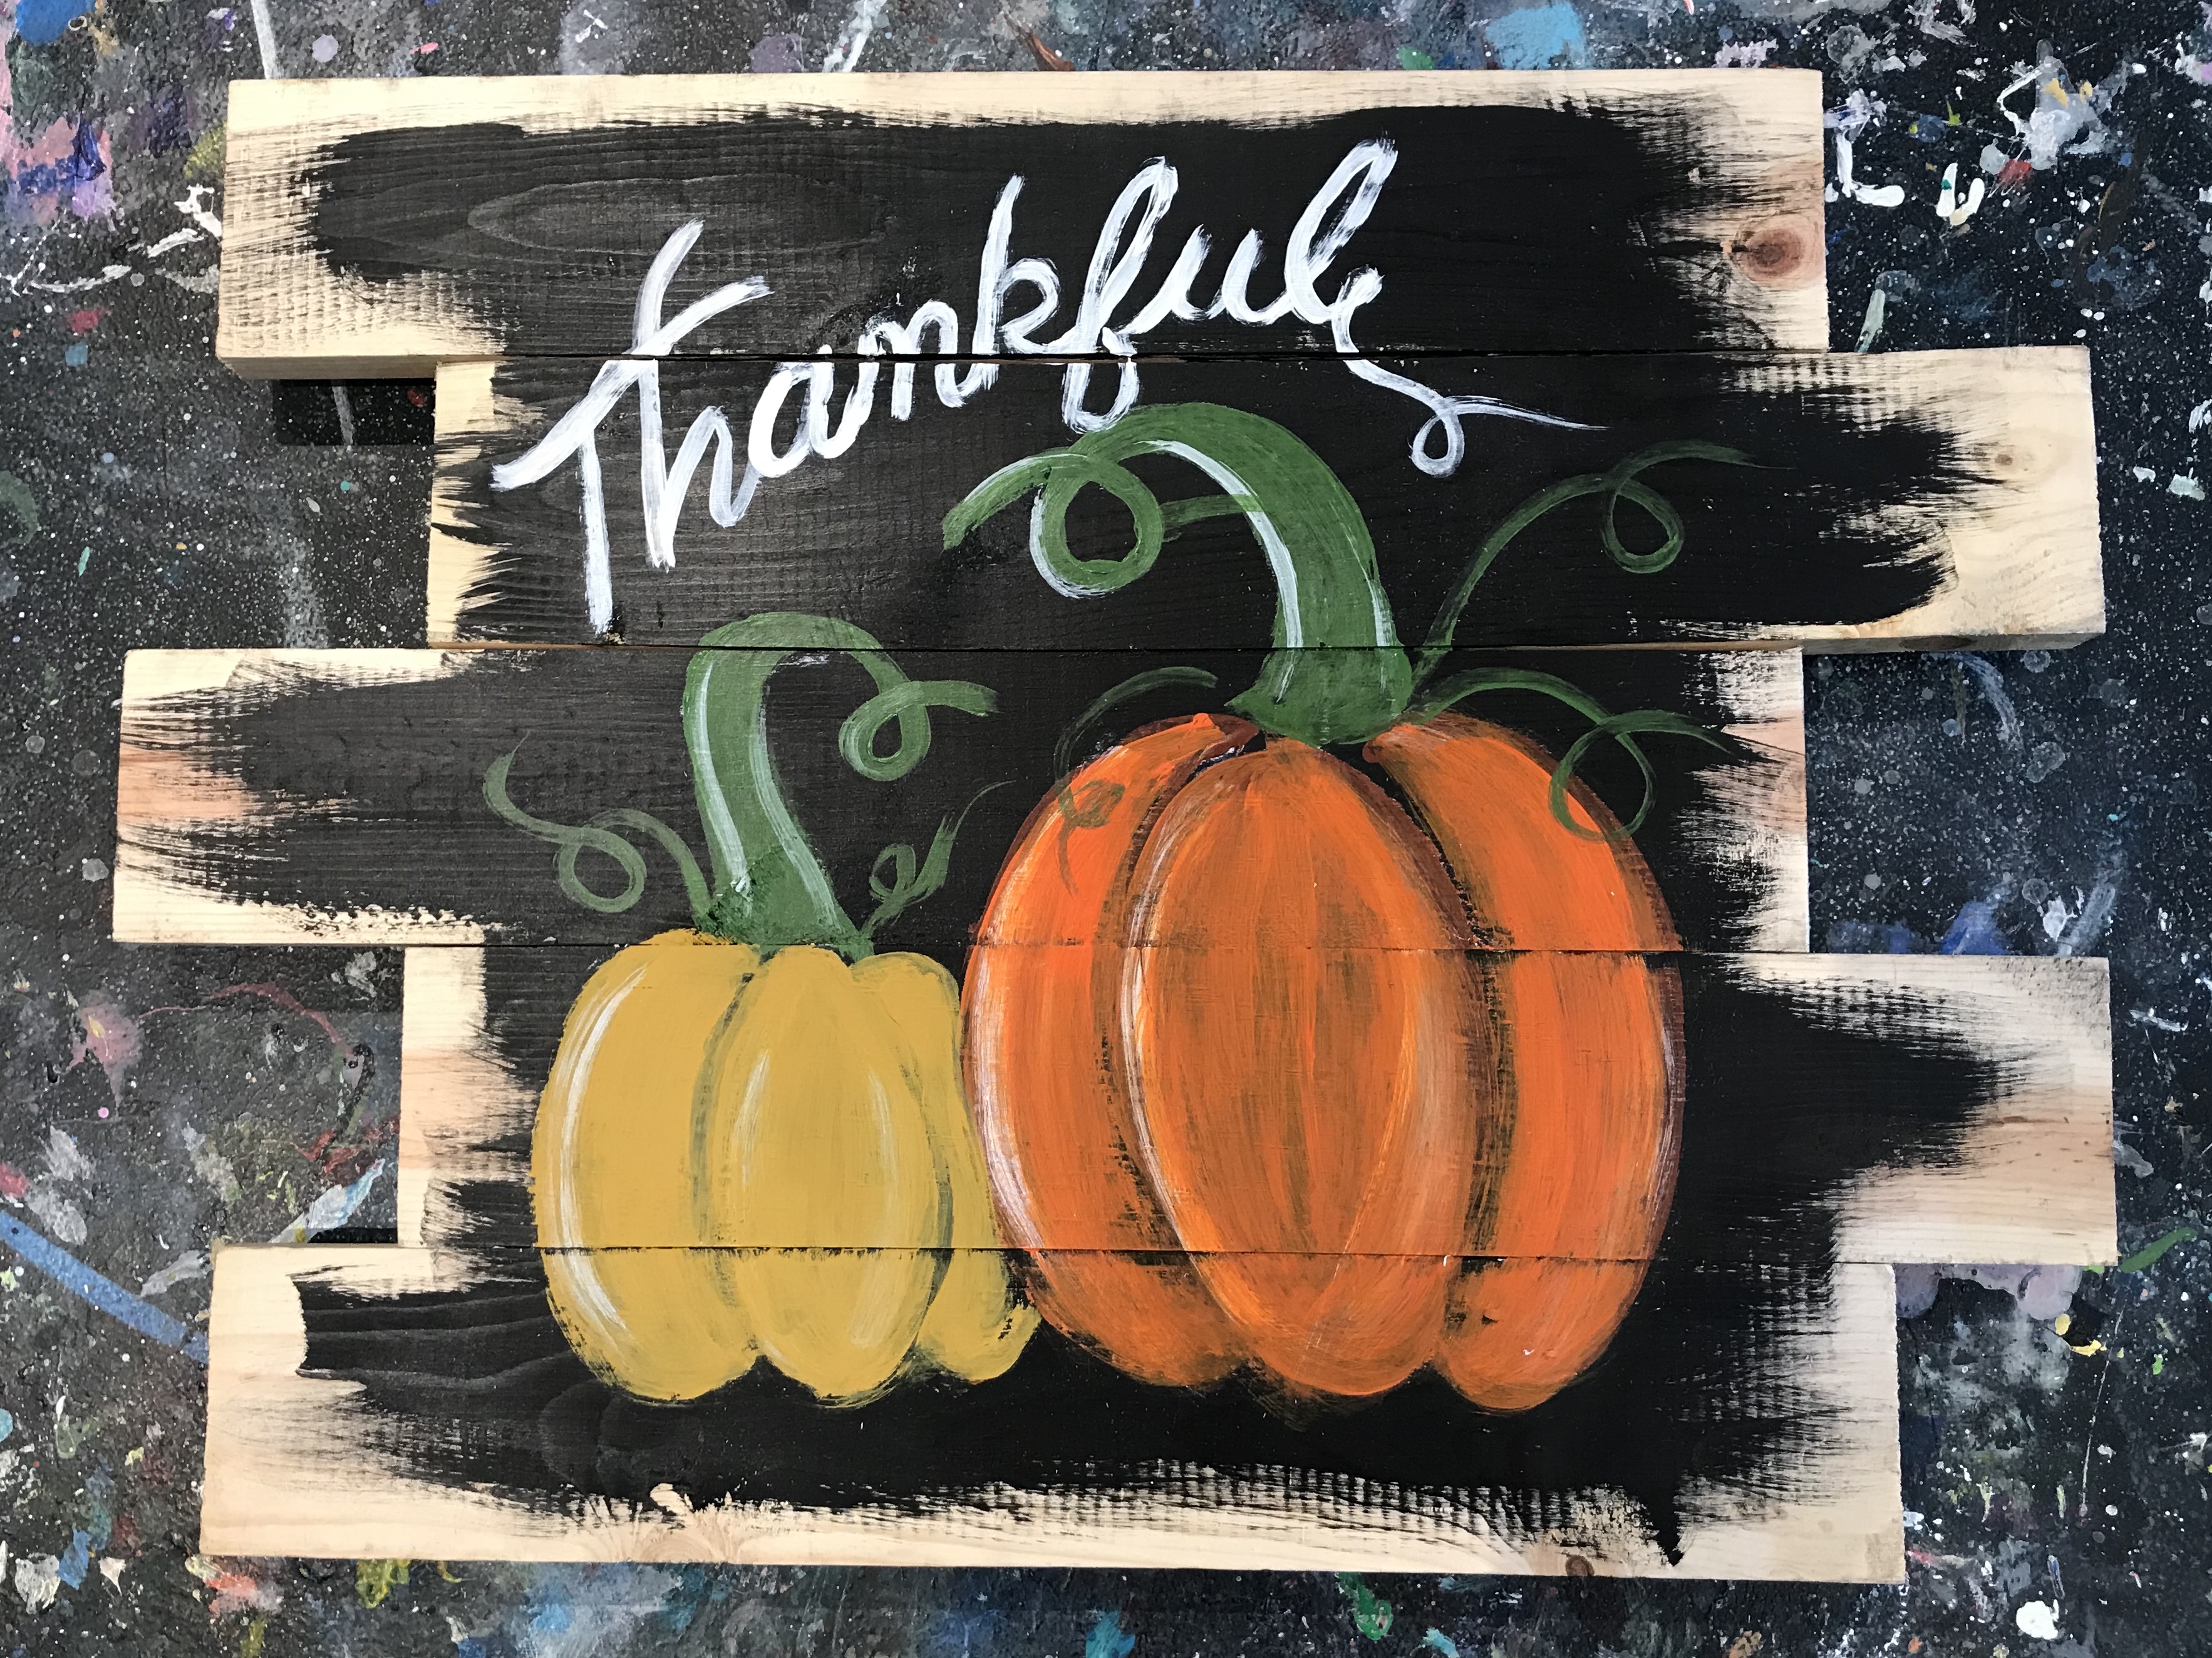 Wooden Pallet Sign – Hello Fall